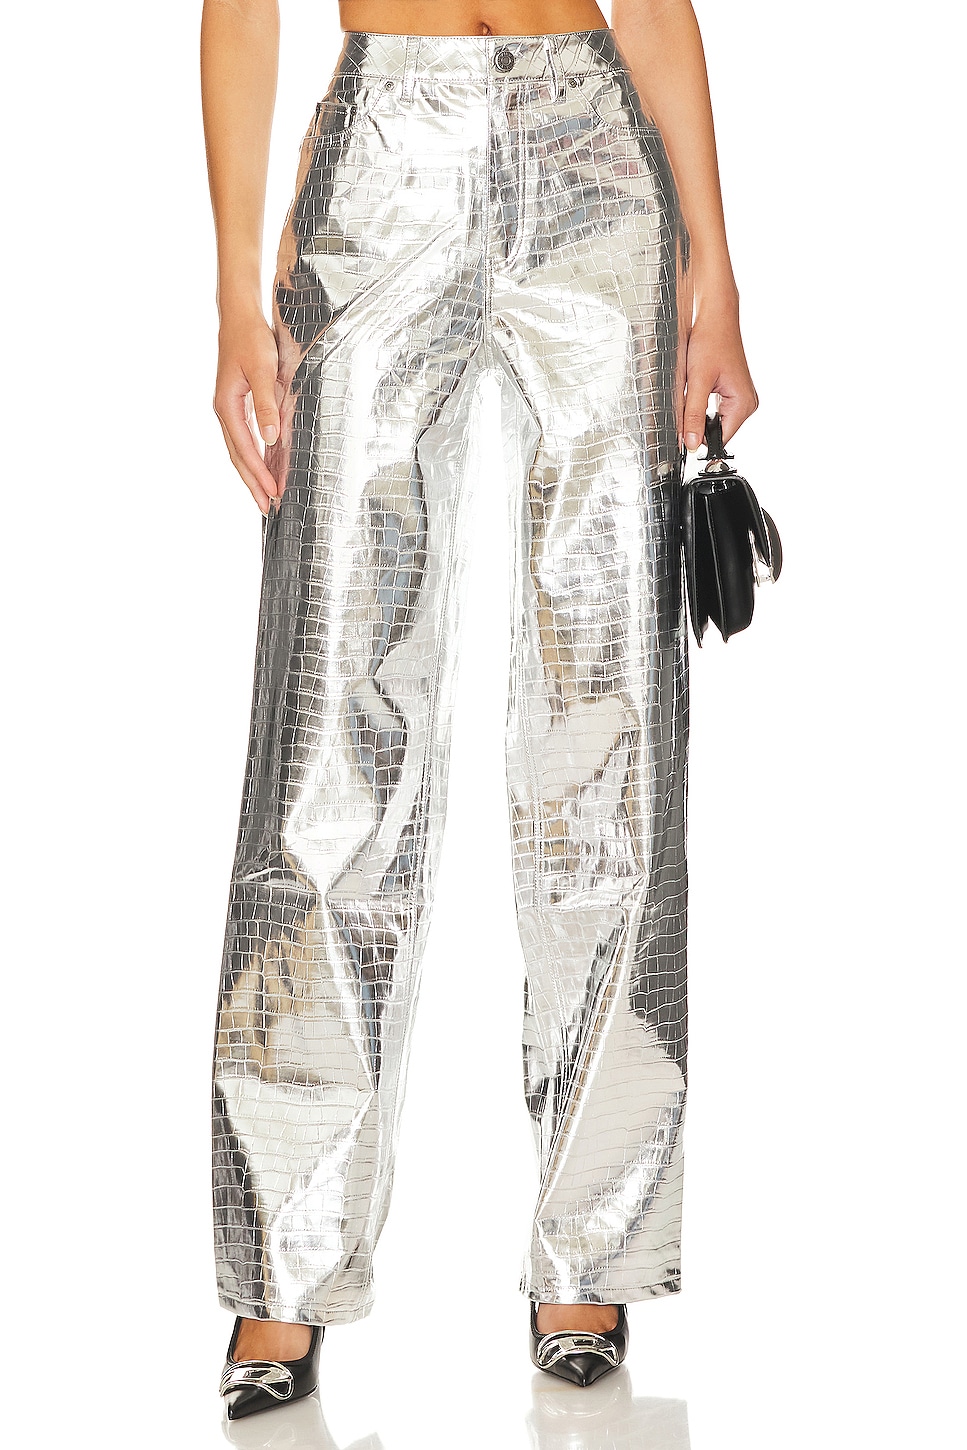 AFRM Marshall Pants in Metallic Silver | REVOLVE